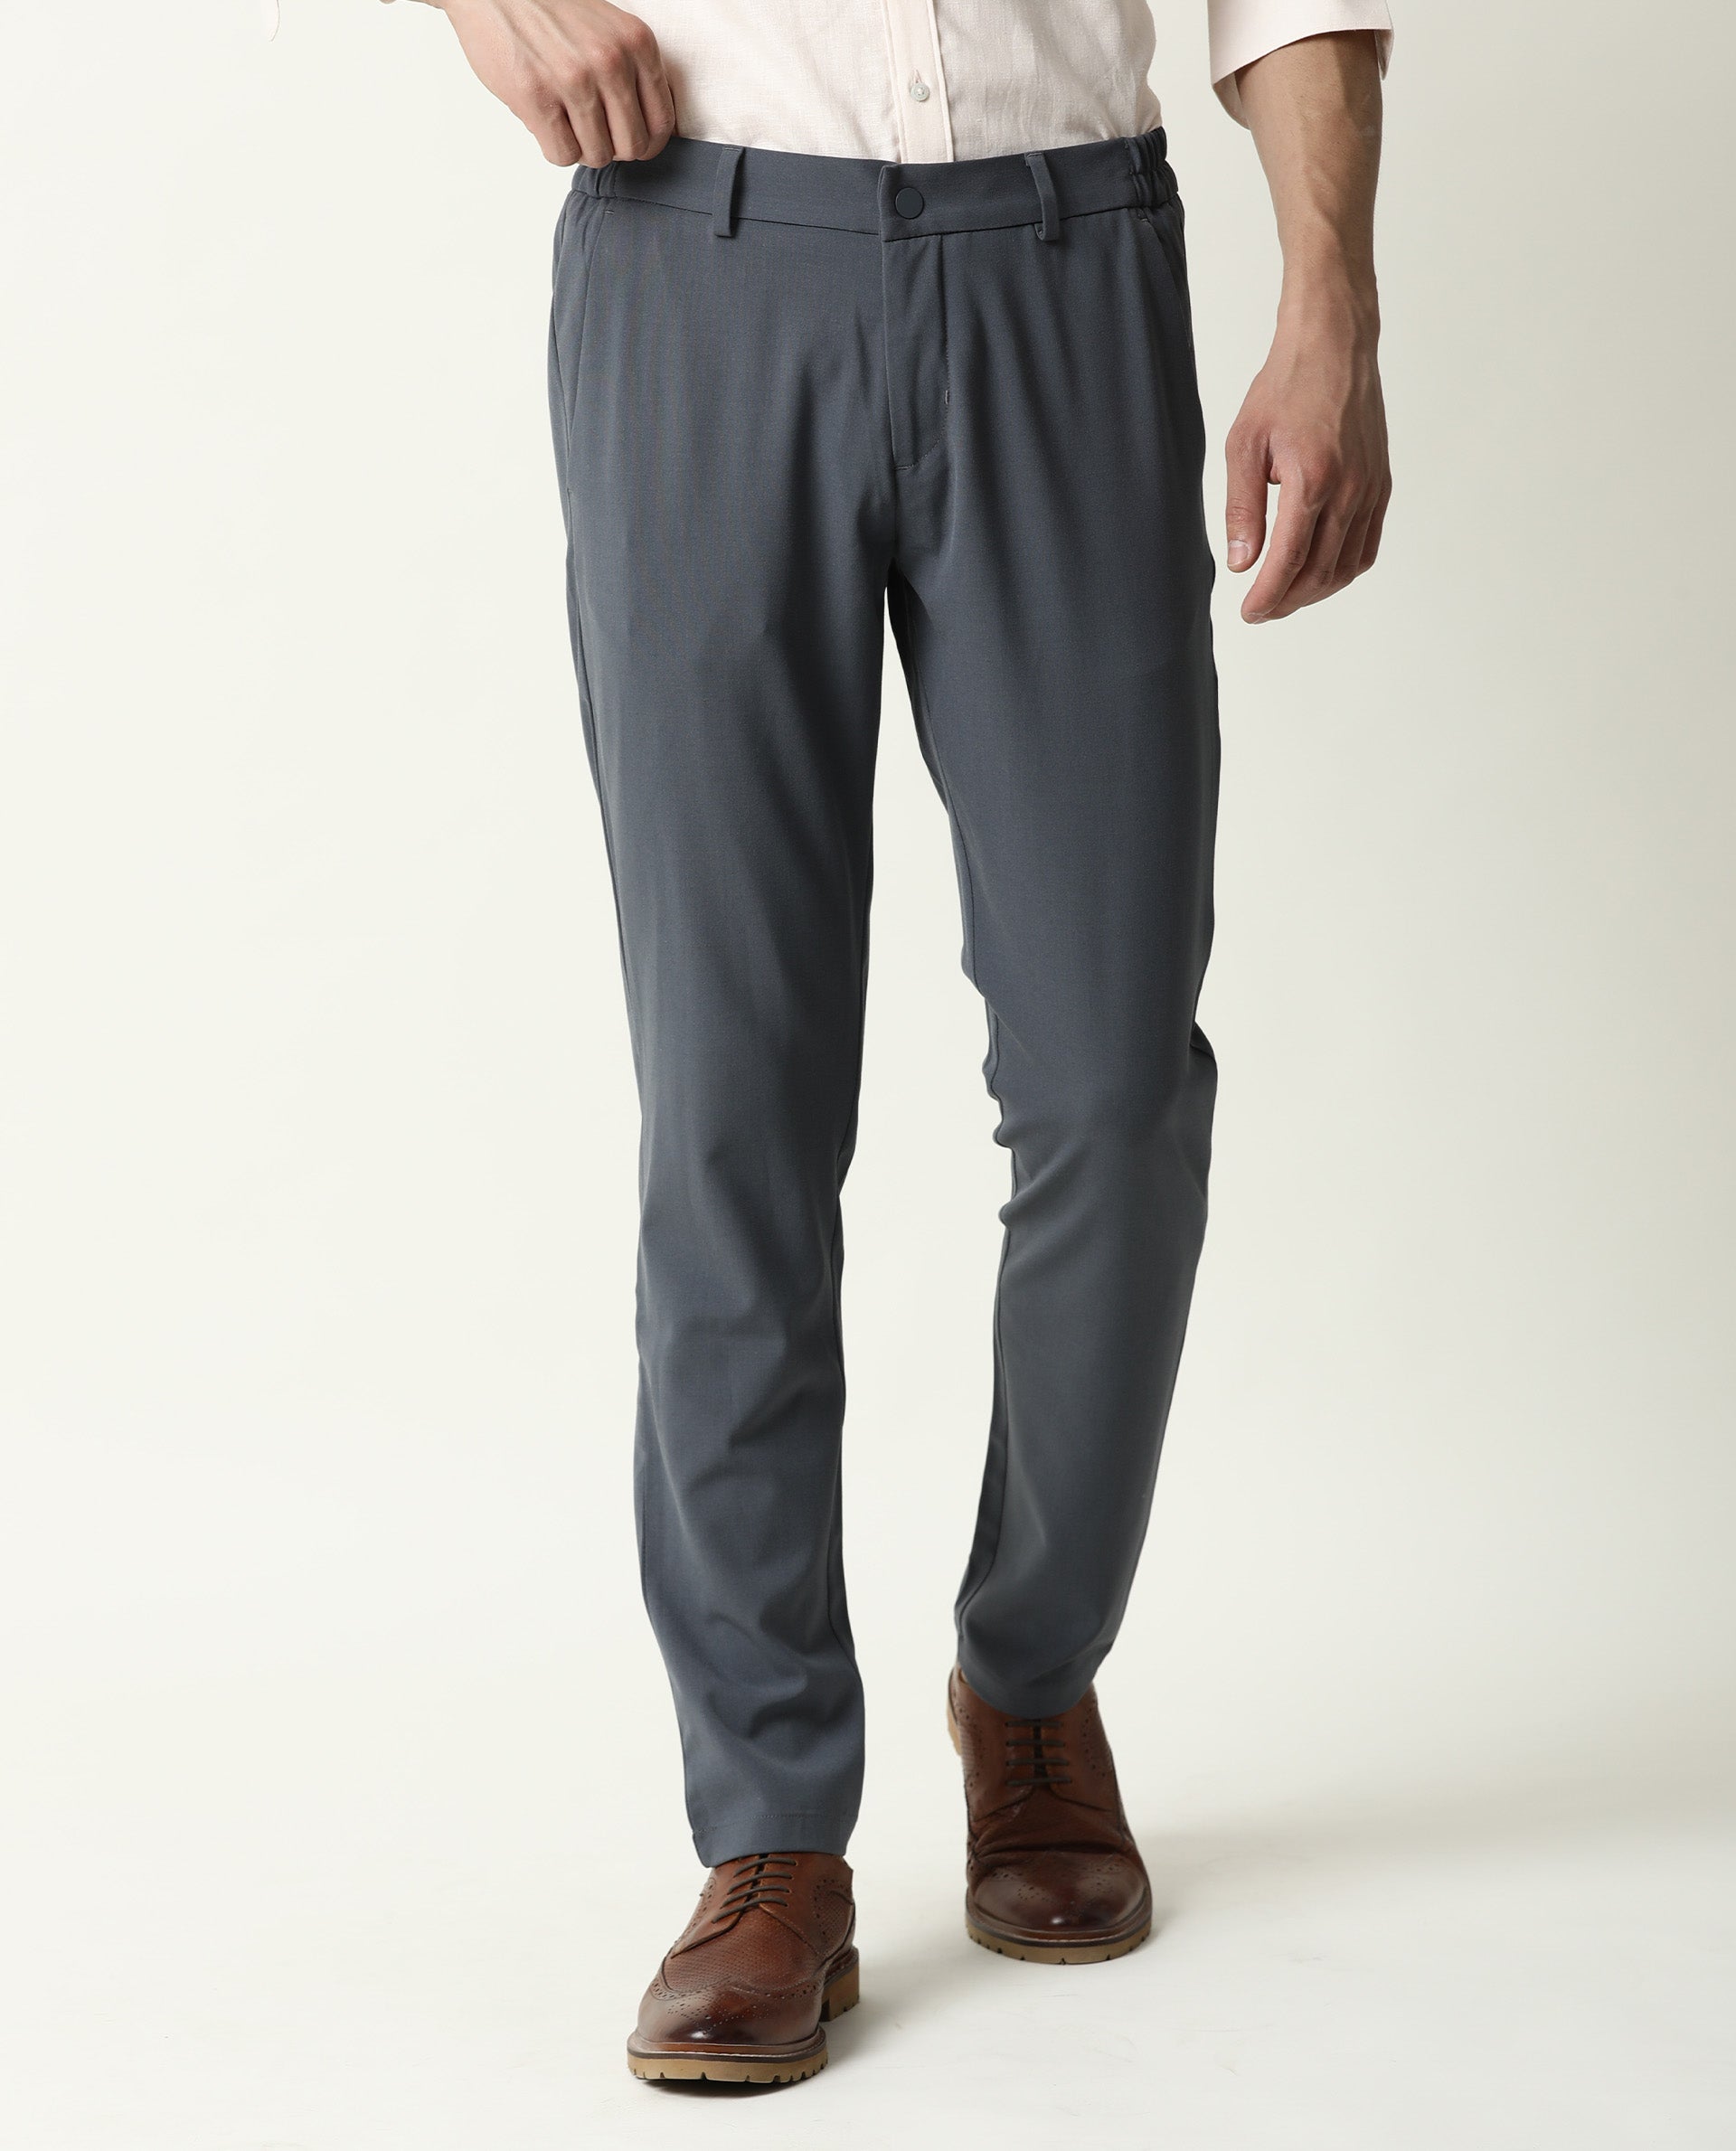 Mens Trousers with Belt - Buy Belt Online in India - Basics